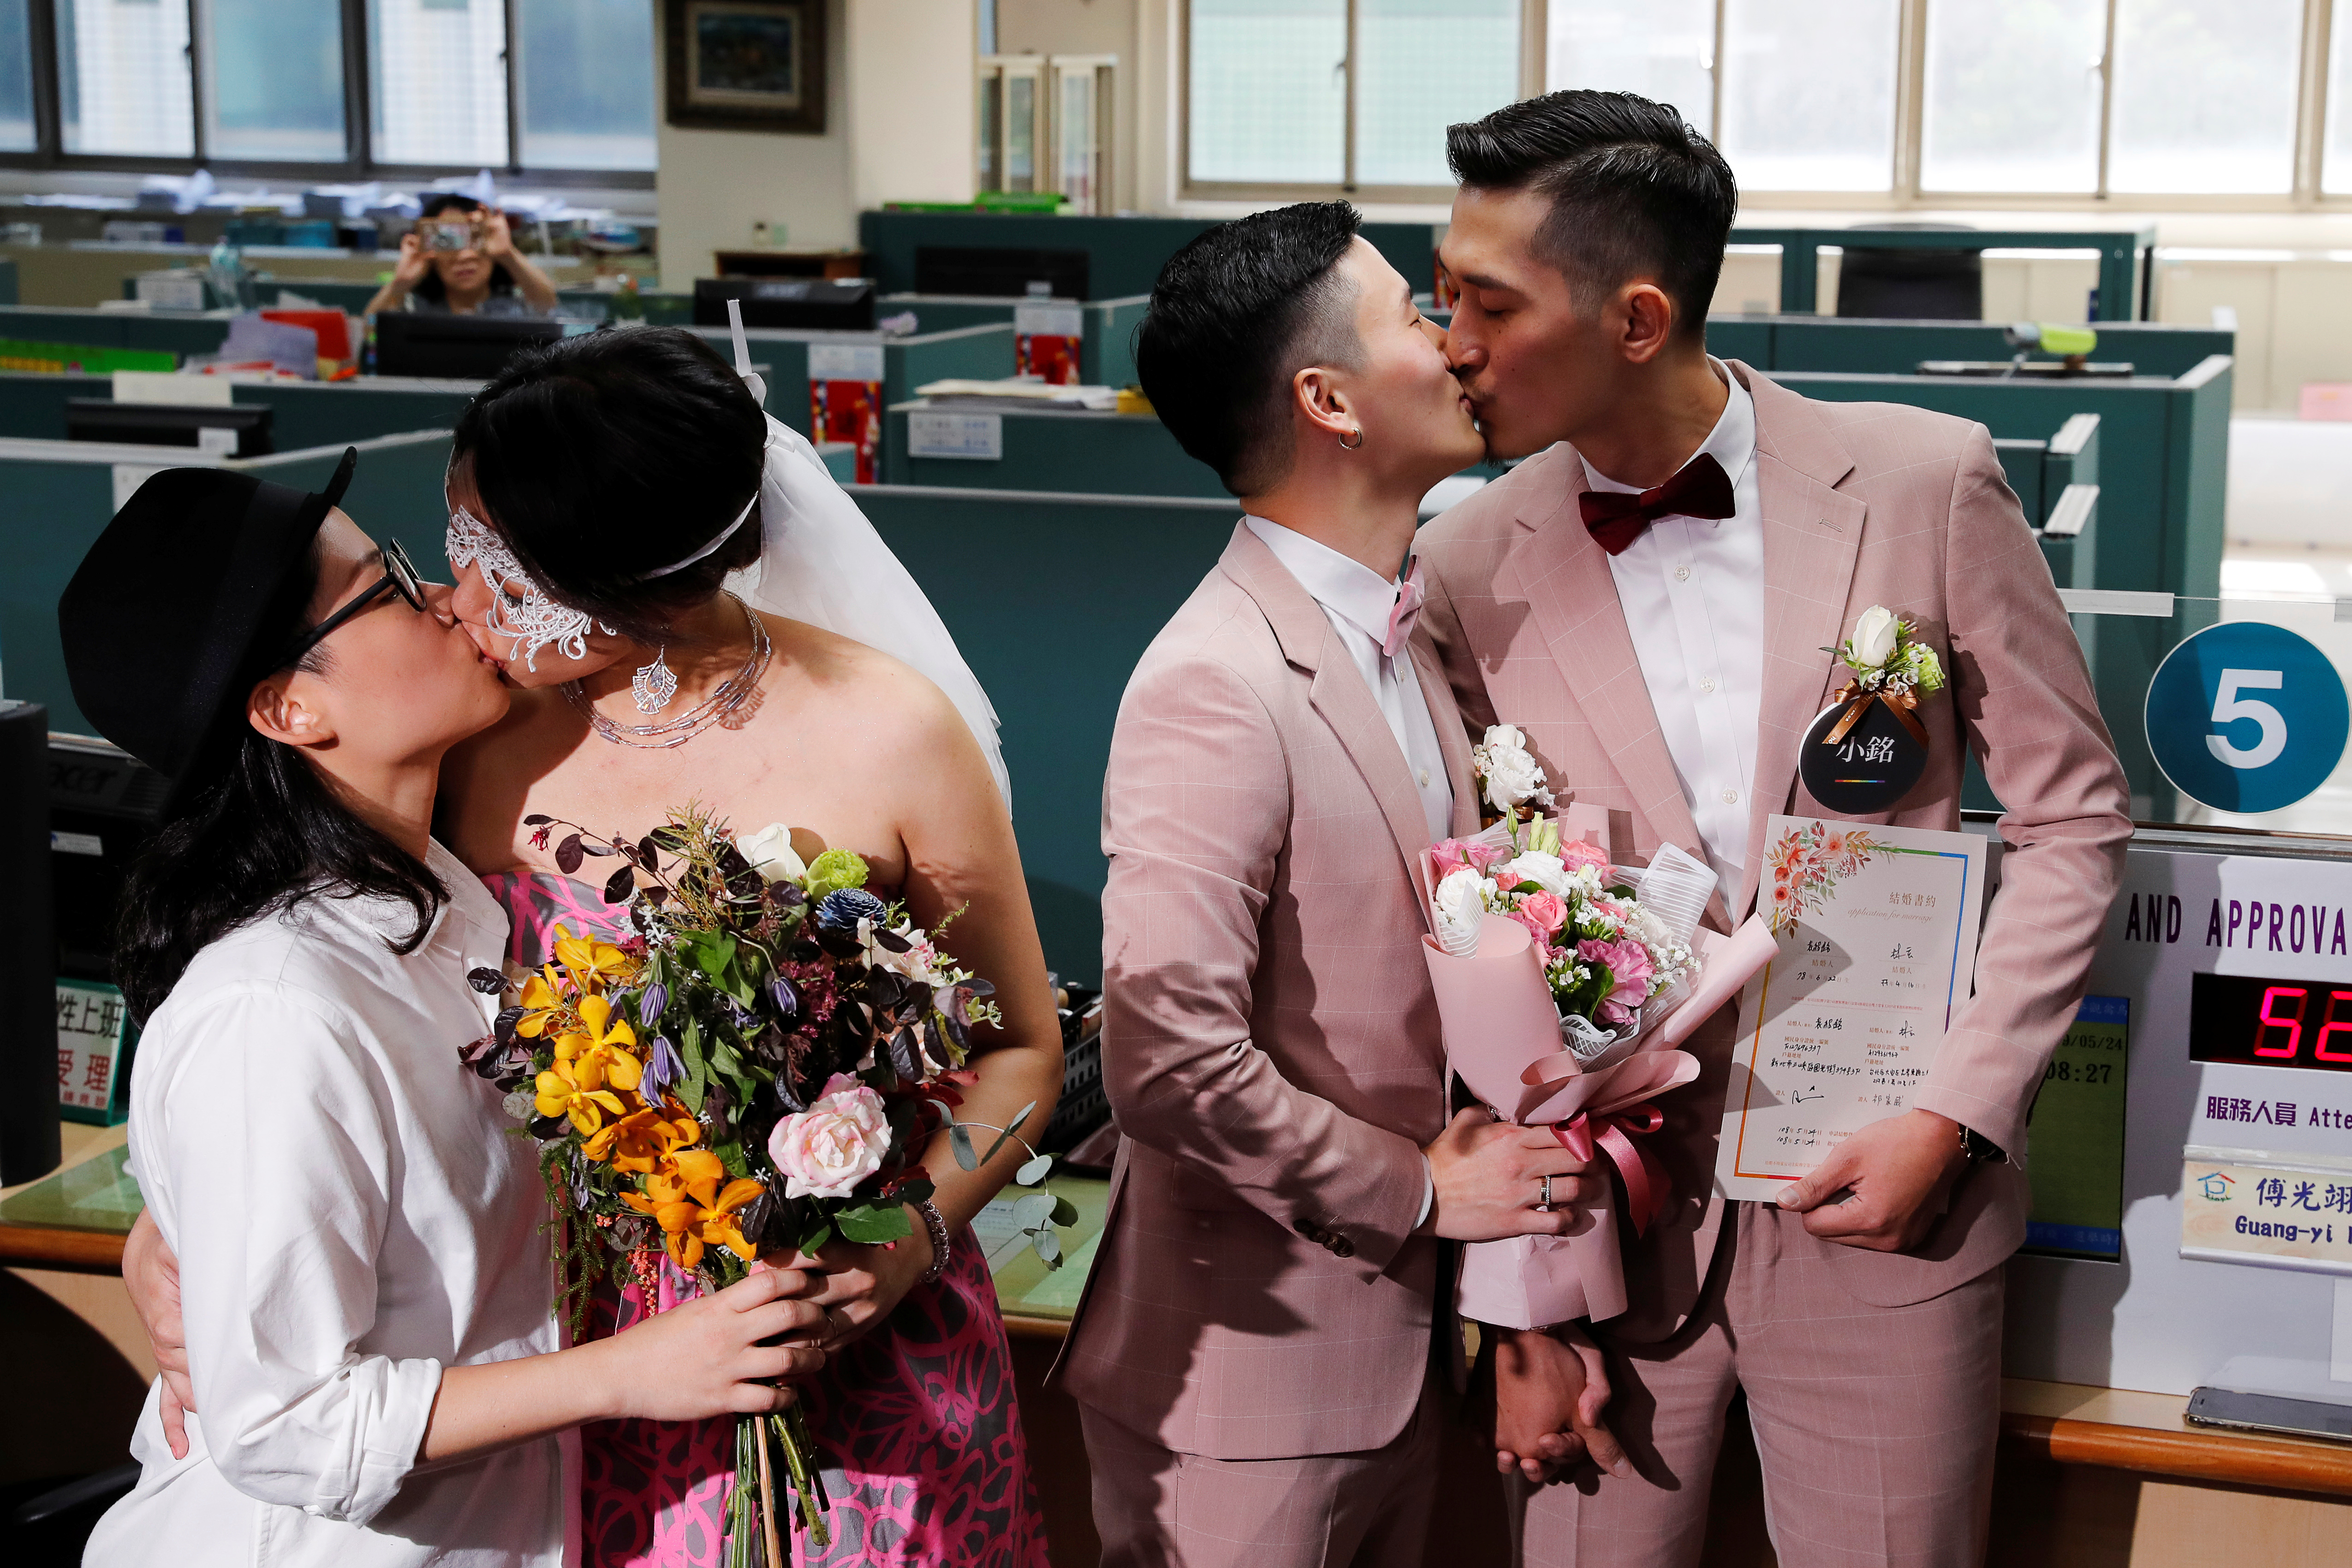 Asias First Official Same-Sex Weddings Just Took Place in Taiwan